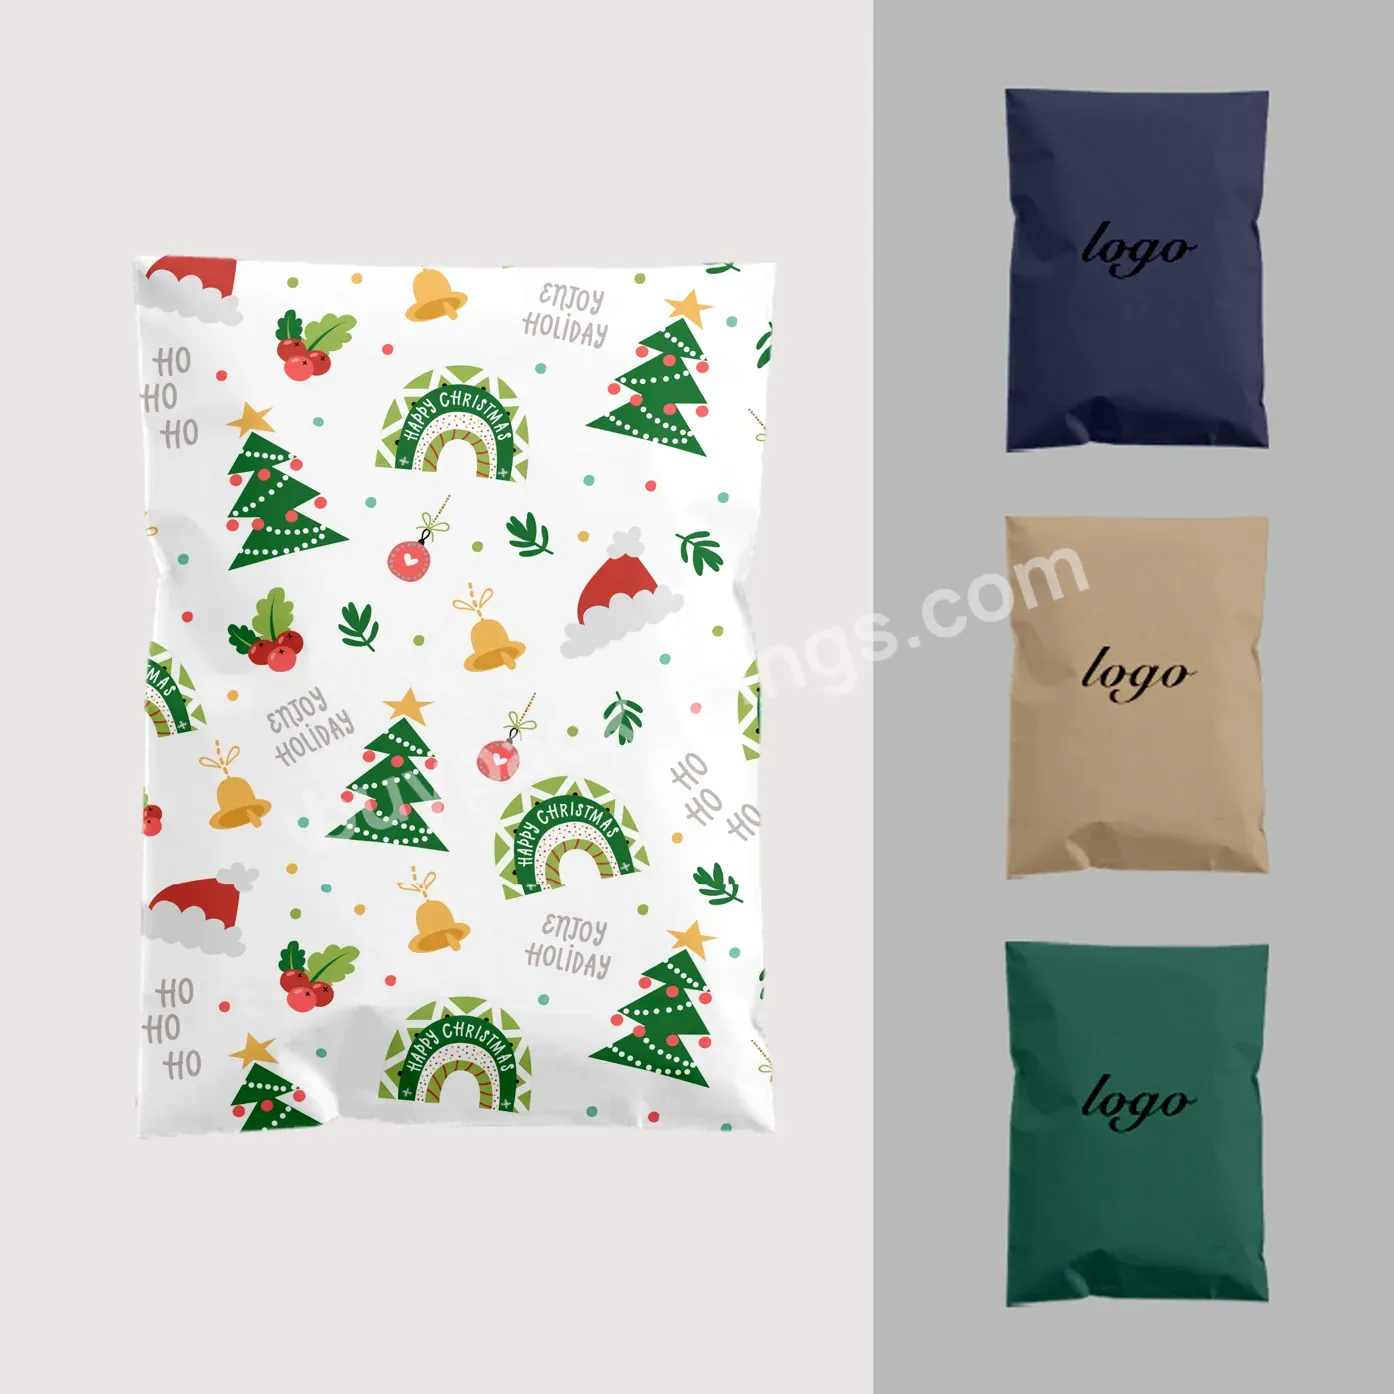 Christmas Poly Mailer Small Business Packing Supplies Waterproof Delivery Bags Clothing Plastic Shipping Bag Polymailers - Buy Christmas Poly Mailer Small Business Packing Supplies Mailing Bags,Waterproof Delivery Bags Amazon Branded Polybag,Clothing